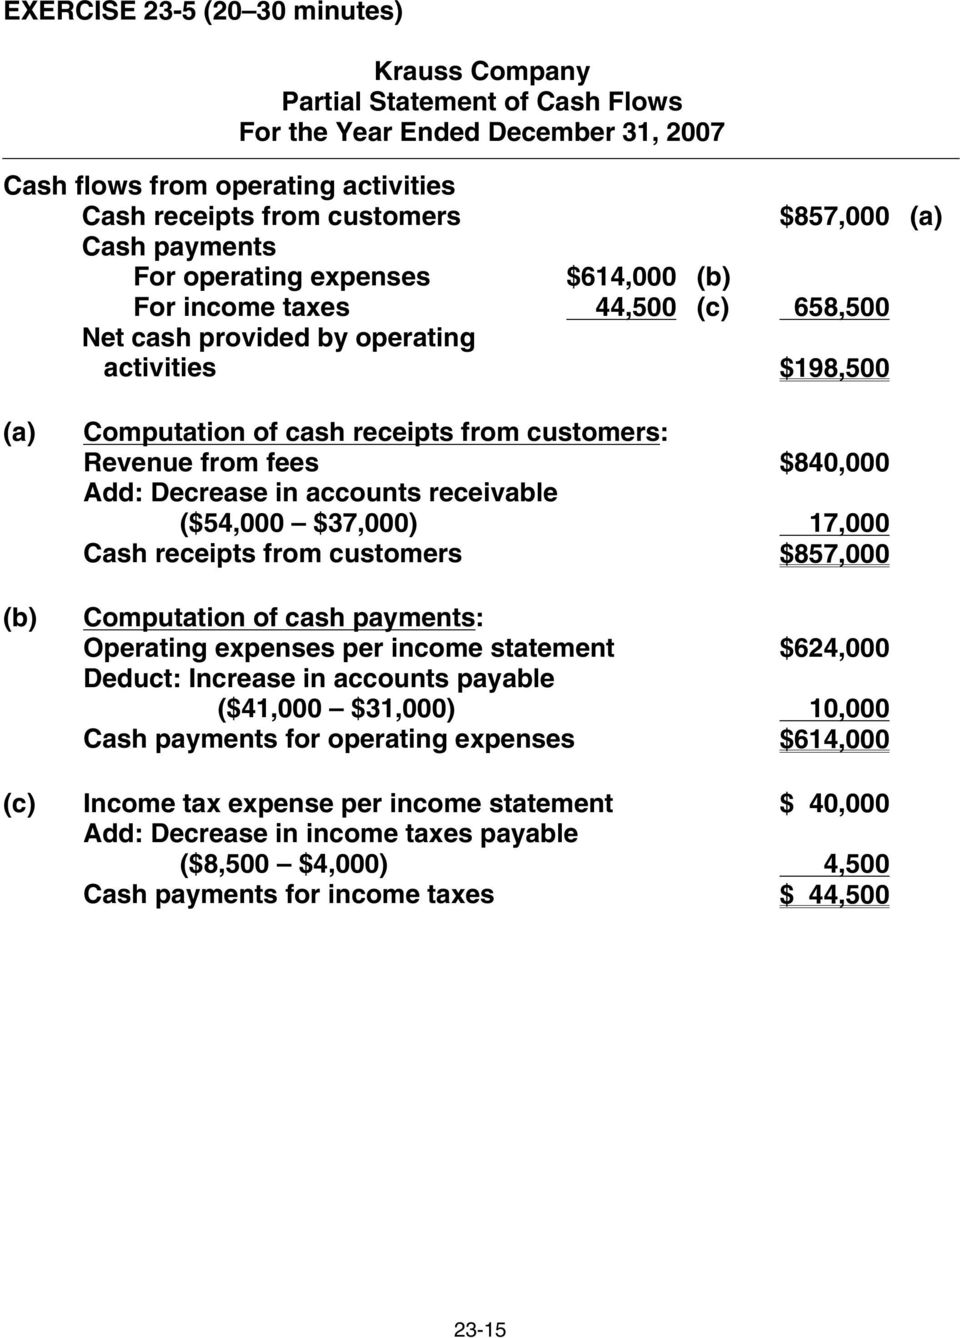 fees $840,000 Add: Decrease in accounts receivable Add: ($54,000 $37,000) 17,000 Cash receipts from customers $857,000 Computation of cash payments: Operating expenses per income statement $624,000